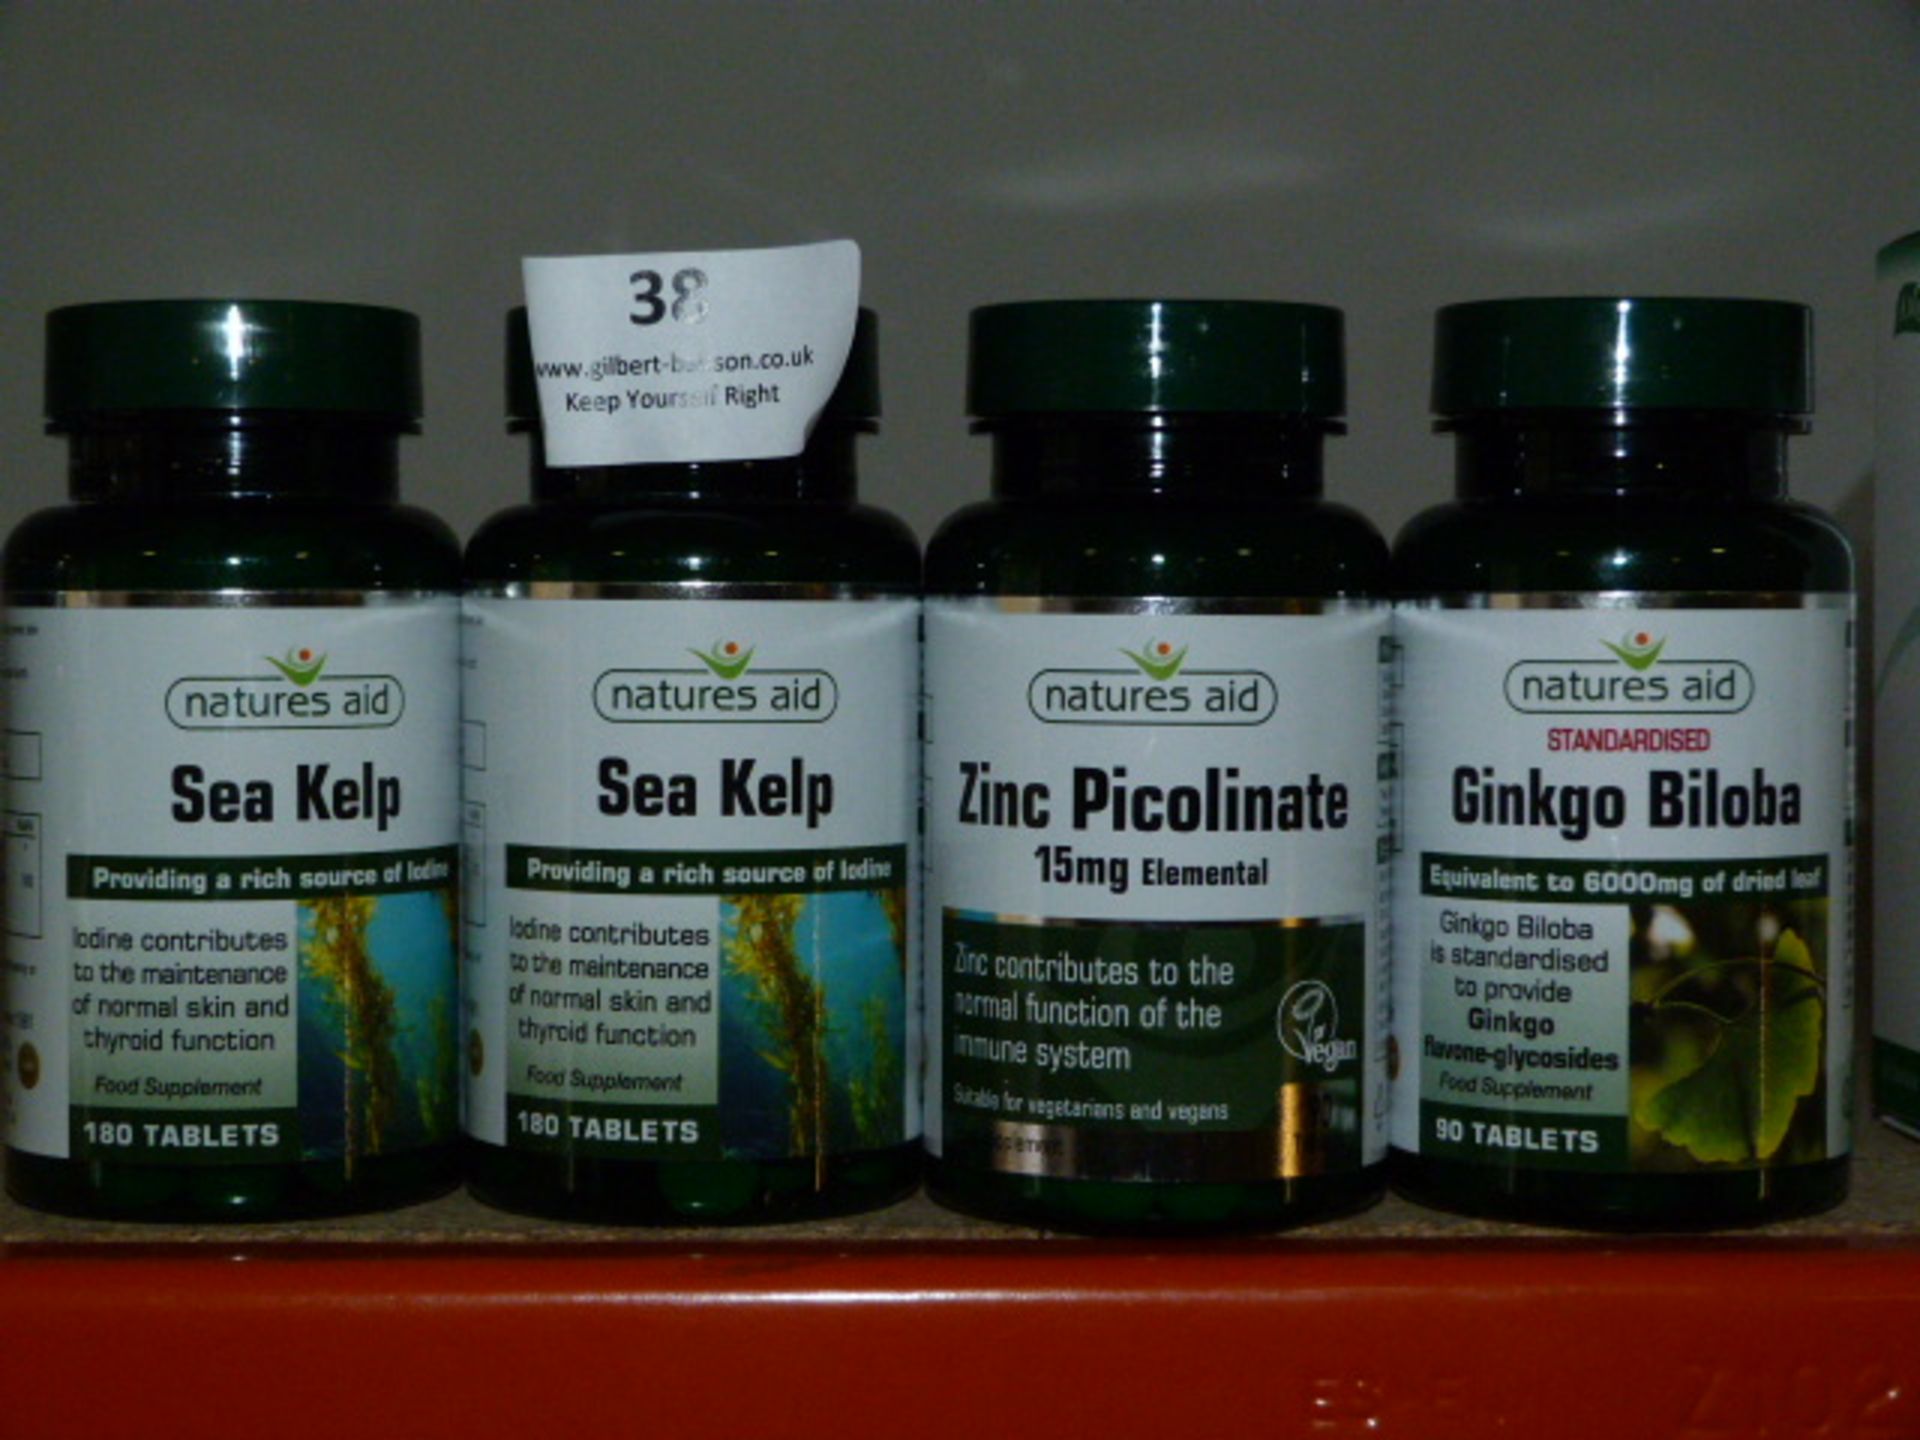 *2 x 180 Tablets of Natures Aid Sea Kelp, 1 x 90 Tables of Zinc Picolinate, 1 x 90 Tablets of Ginkgo